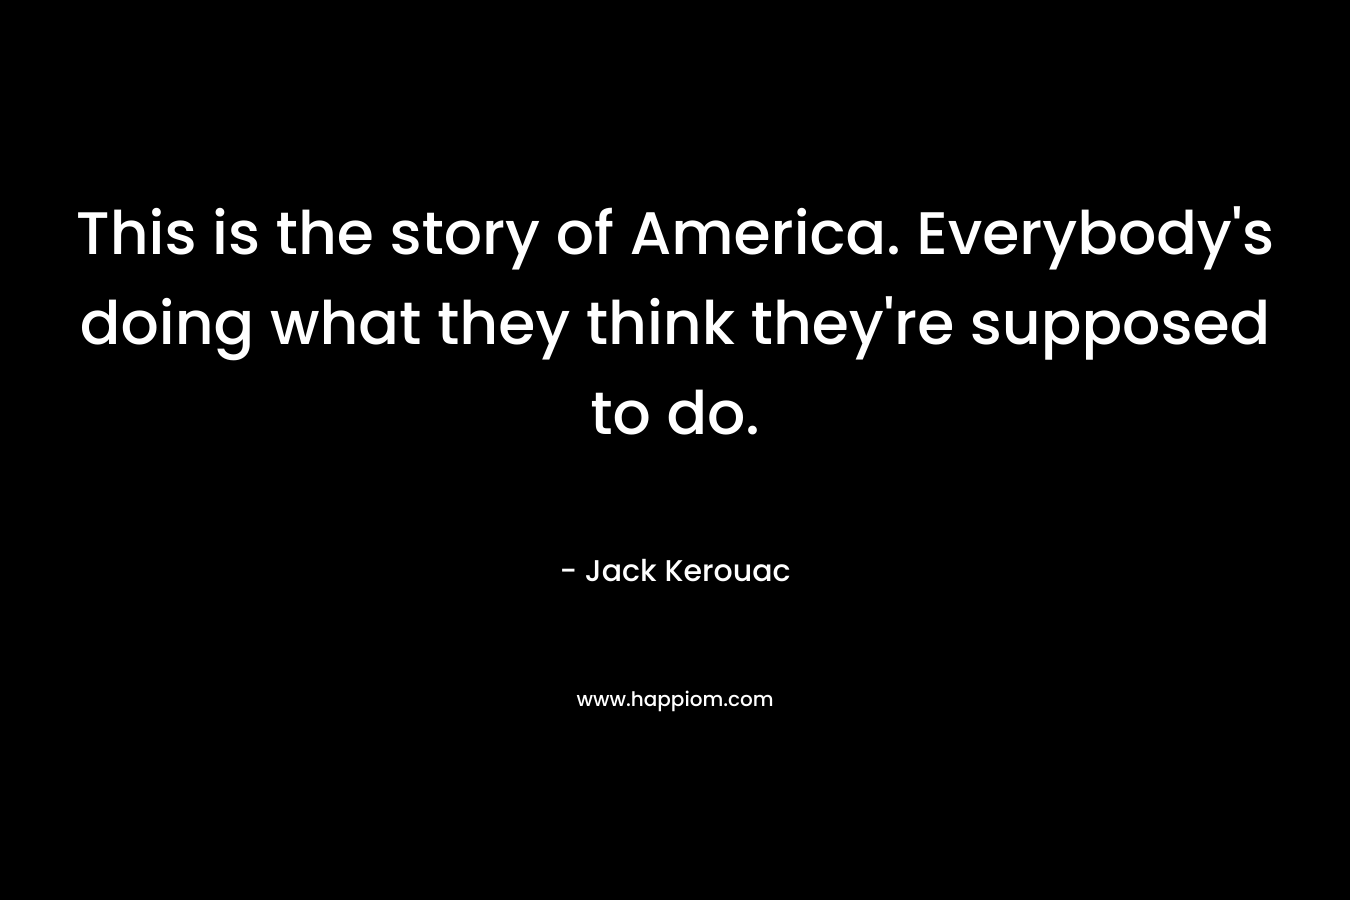 This is the story of America. Everybody’s doing what they think they’re supposed to do. – Jack Kerouac